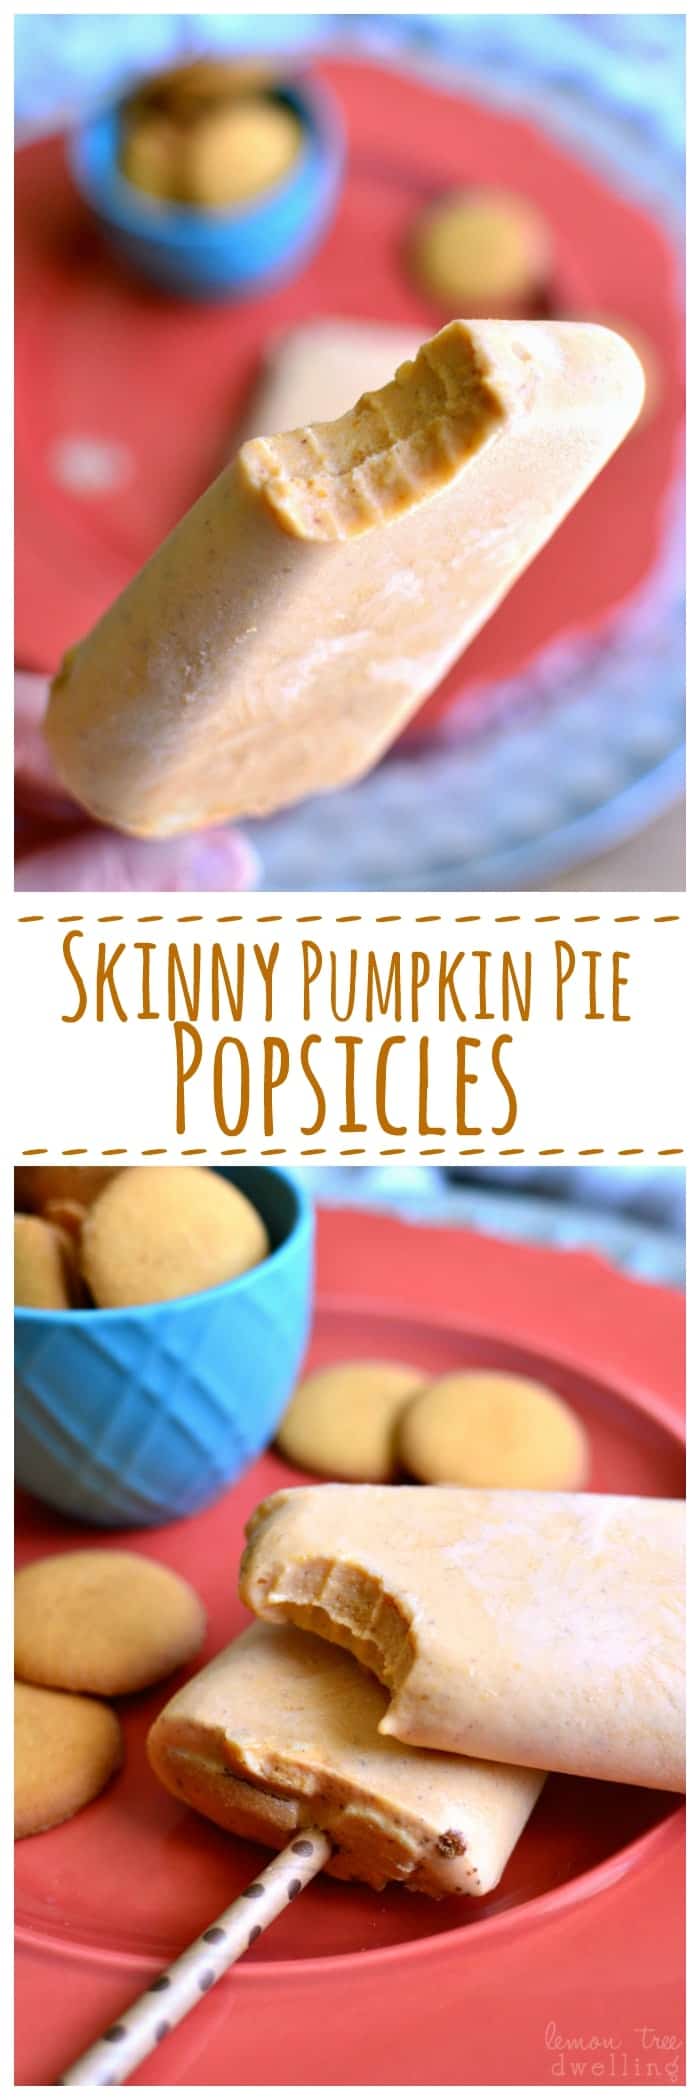 Skinny Pumpkin Pie Popsicles made with Truvia®! These popsicles are rich, creamy, and packed with pumpkin flavor. So delicious, you would never guess they're "skinny"!